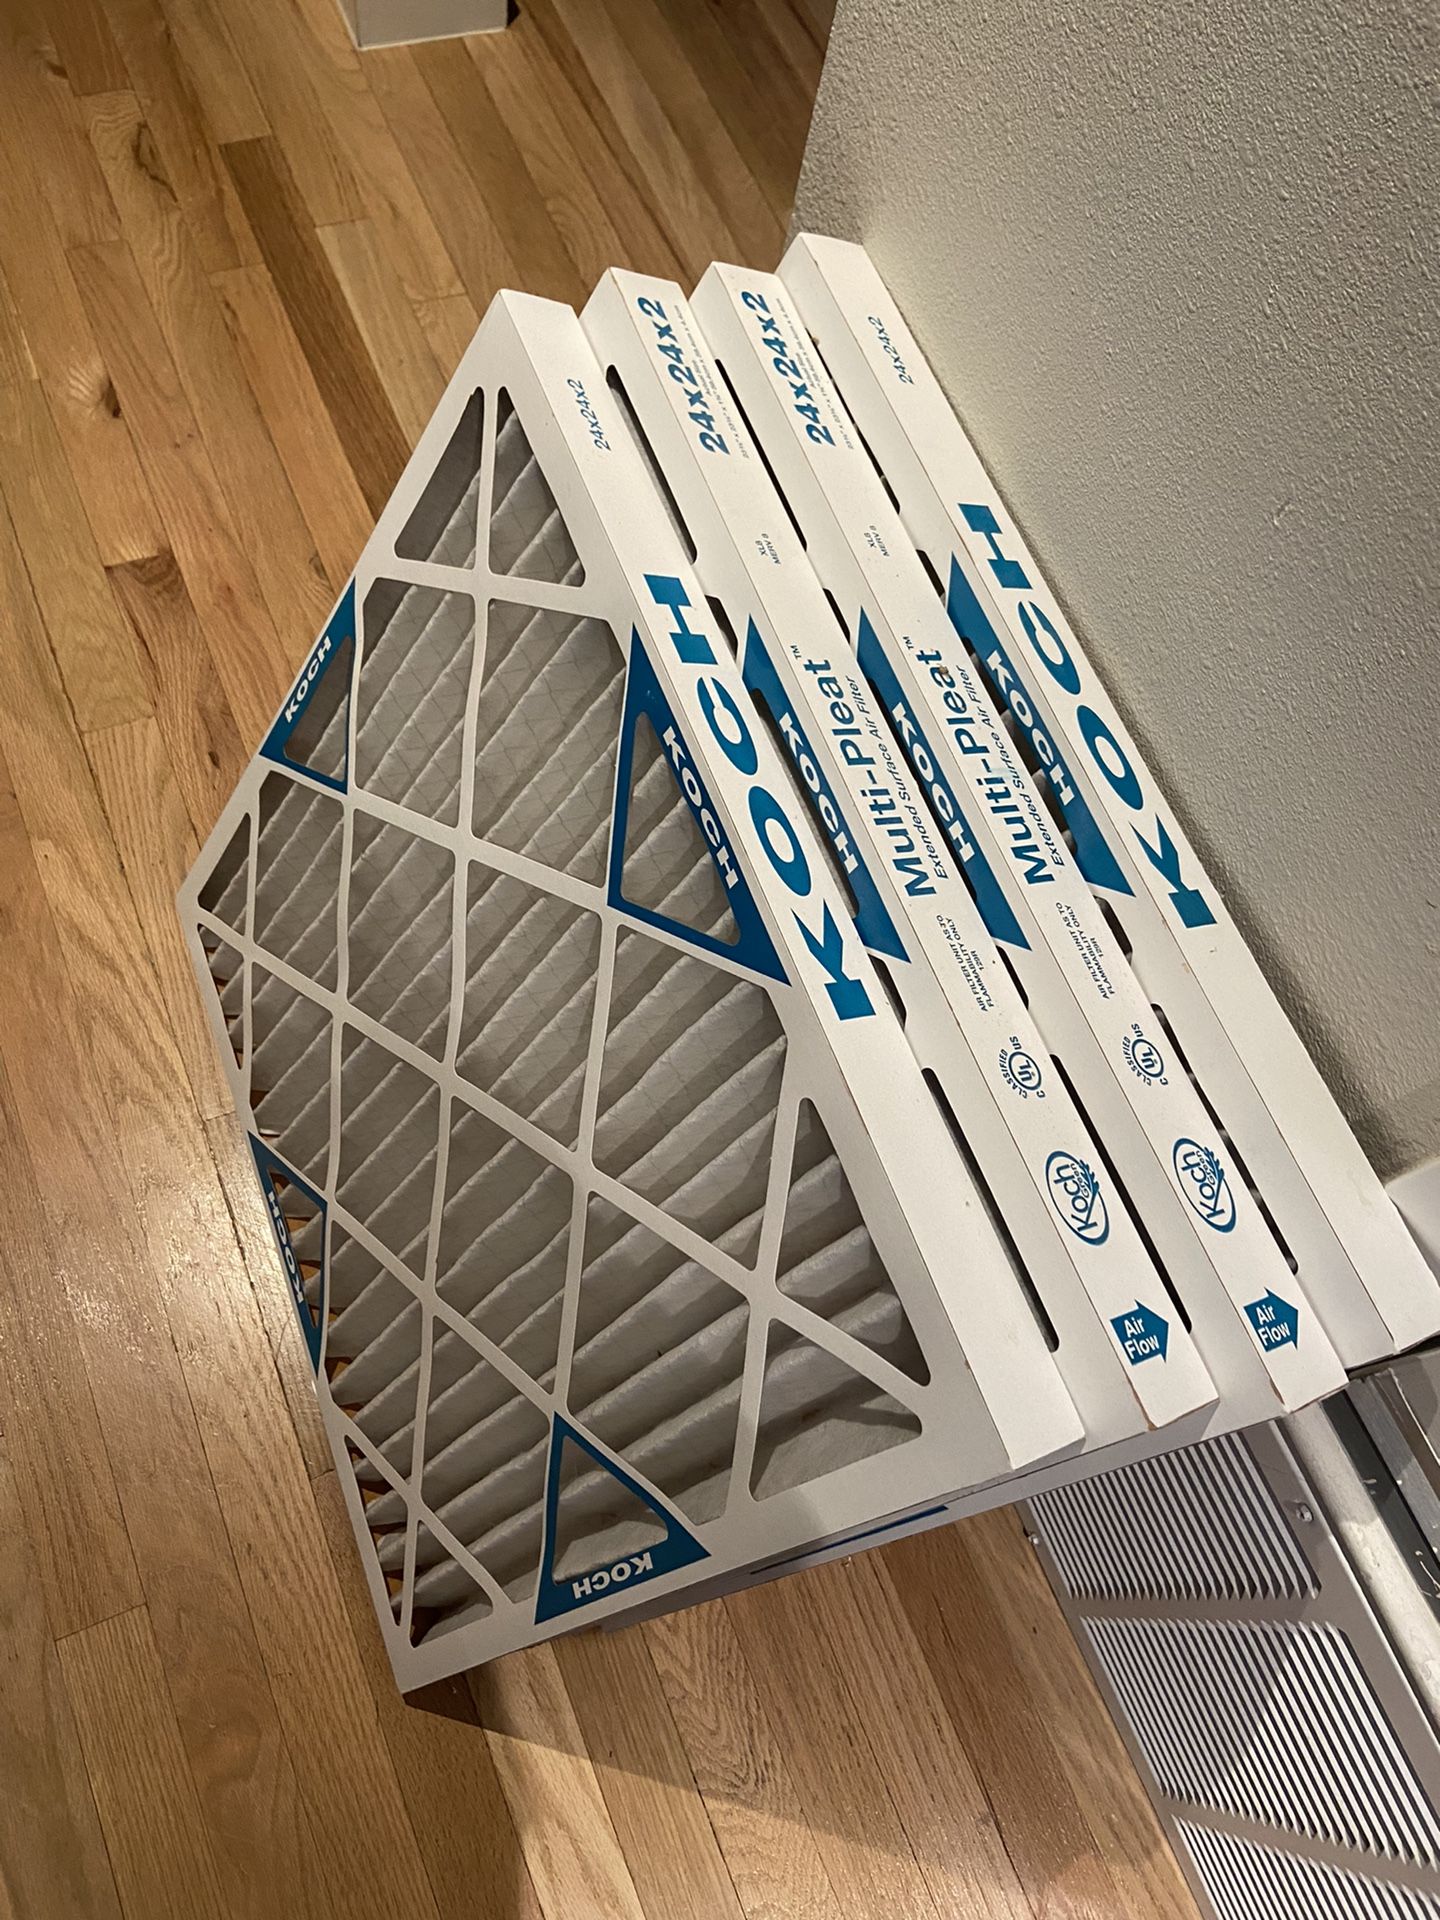 Air Filters For HVAC 24x24x2